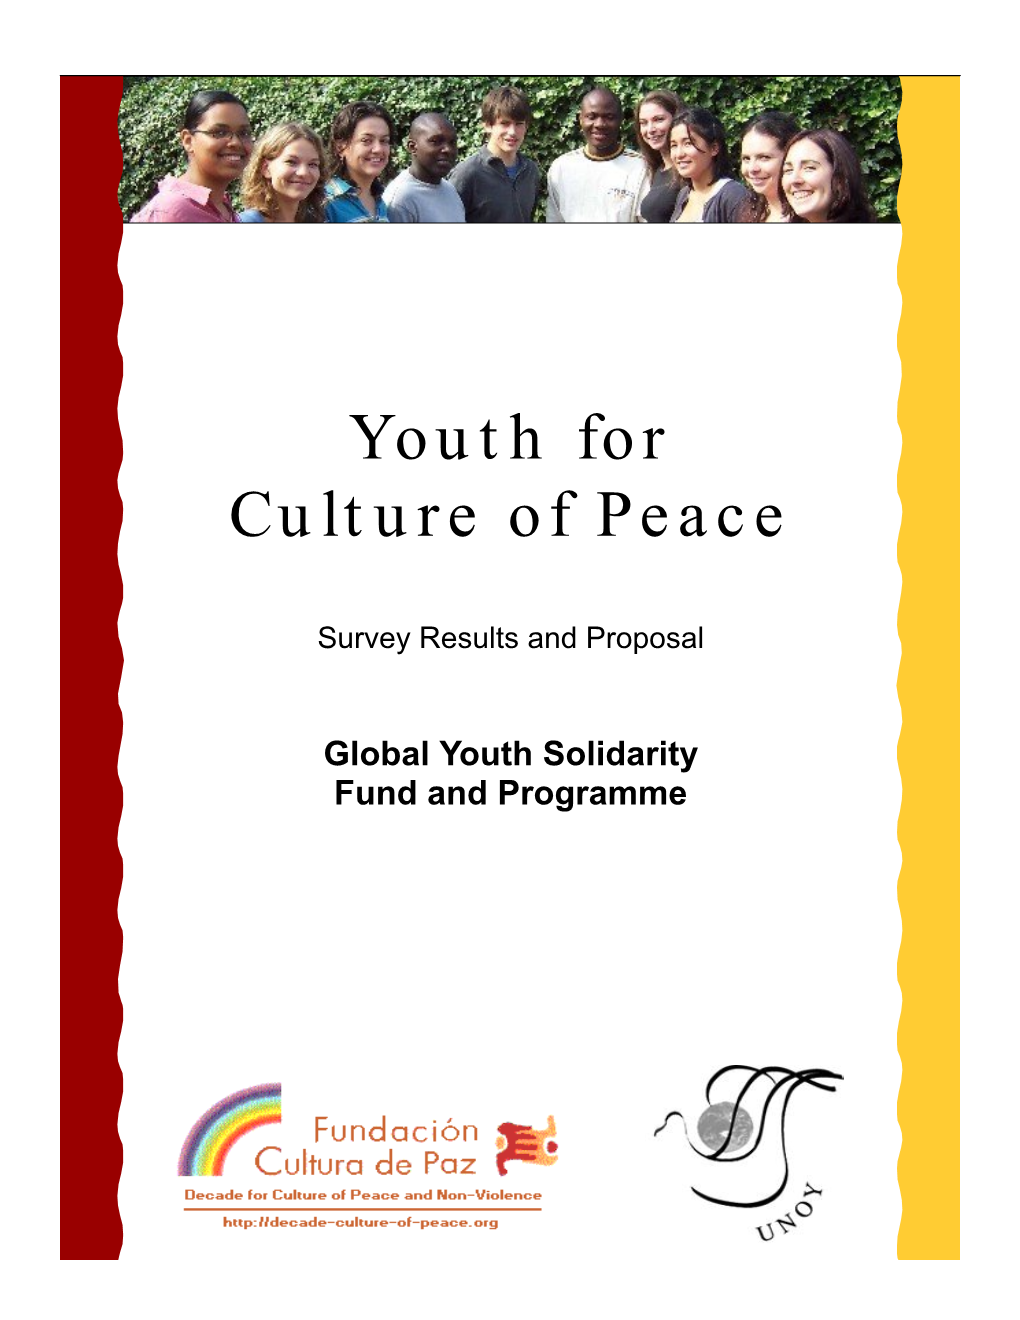 Global Youth Solidarity Fund and Programme Survey Results and Proposal